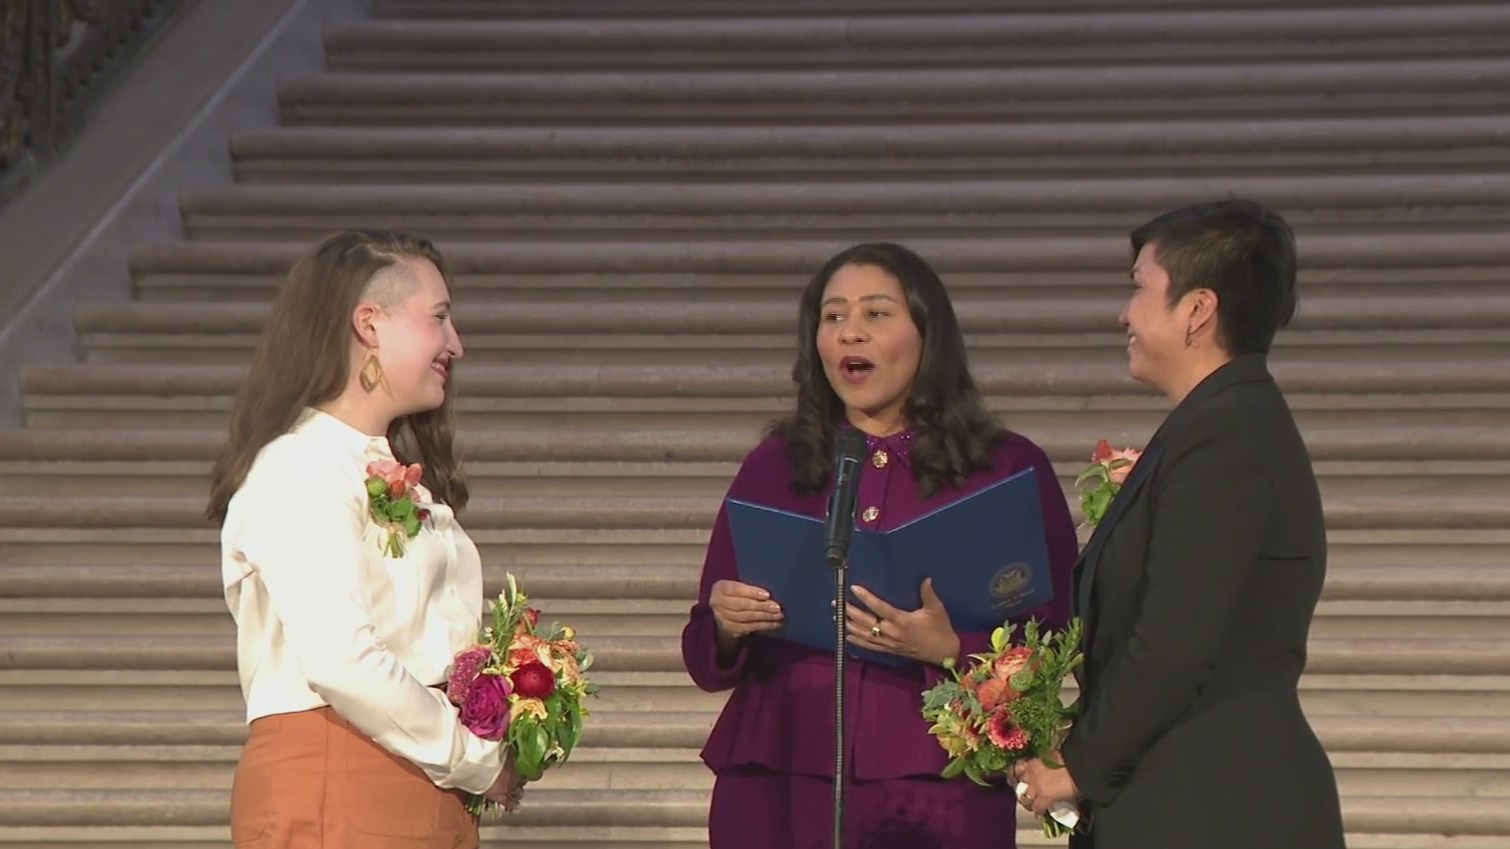 Mayor London Breed presides over the wedding of Madelyn and Indira Carmona at San Francisco City Hall on June 7, 2021, the first day weddings were held at City Hall since the start of the COVID-19 pandemic. (CBS)